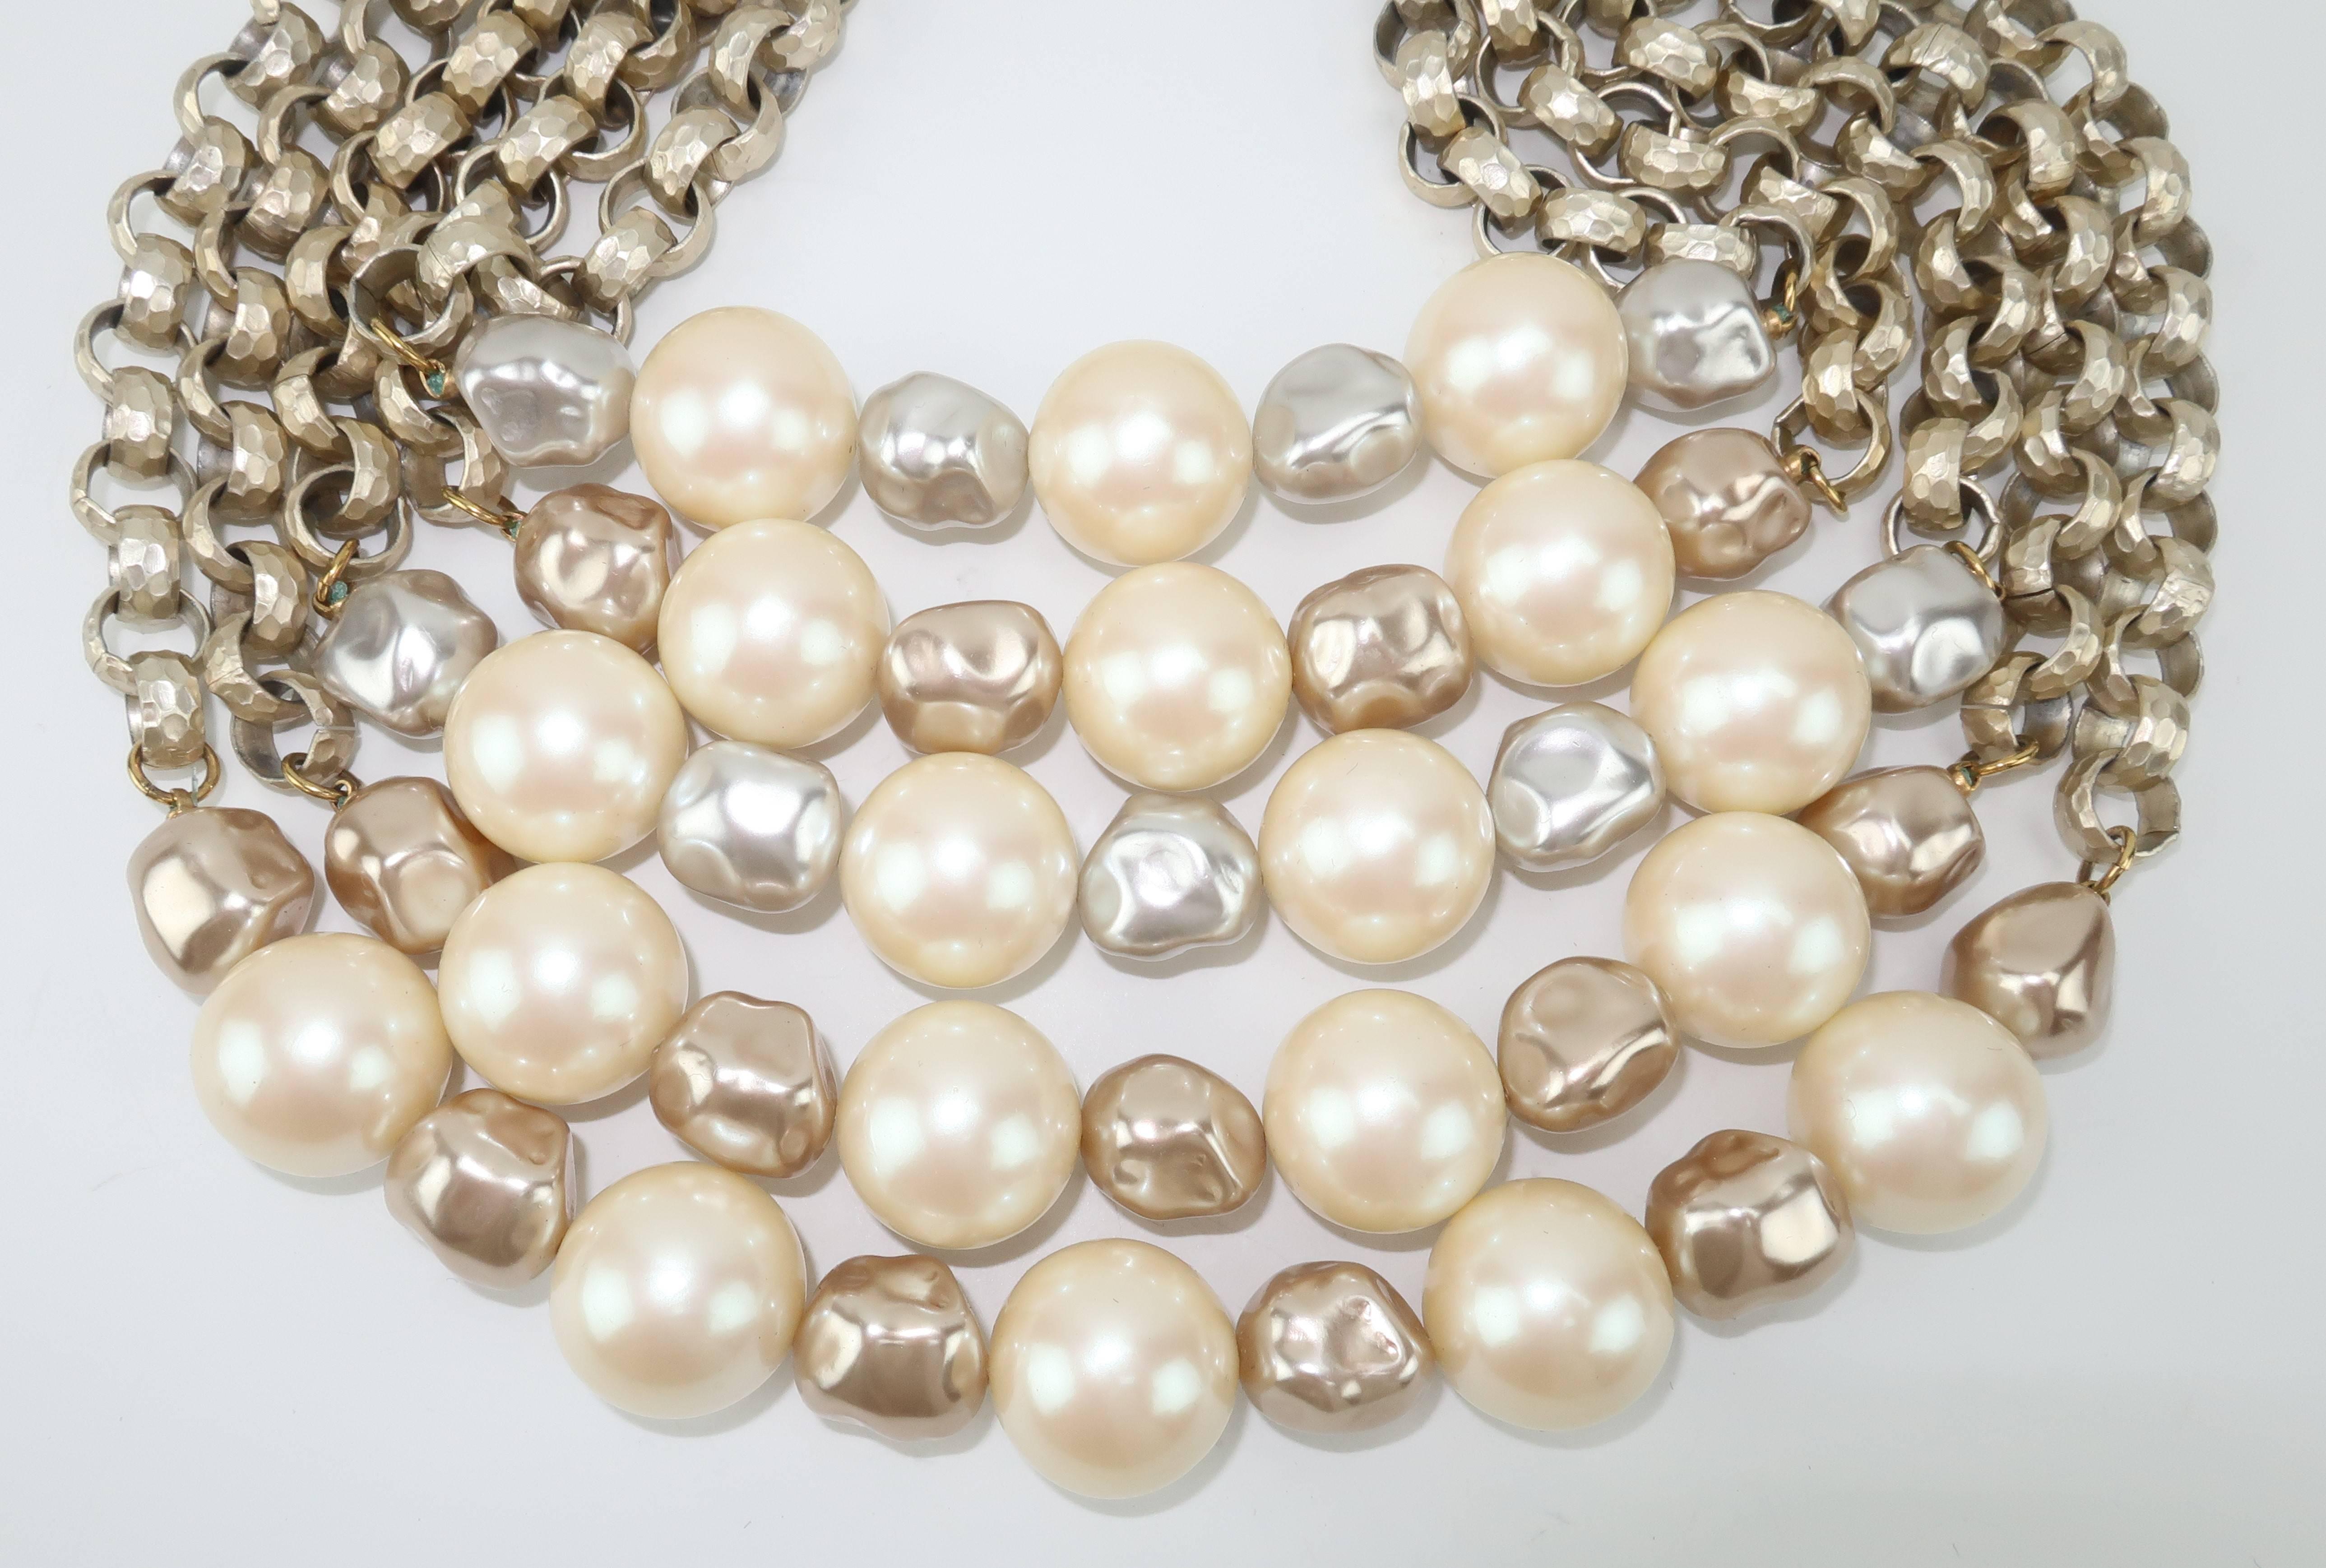 Stunning & stylish!  This Yves Saint Laurent multi-strand necklace is resplendent with three shades of opulent faux pearls suspended by hammered silver tone metal links.  The combination of the pearls and the metal set this multi-strand apart from